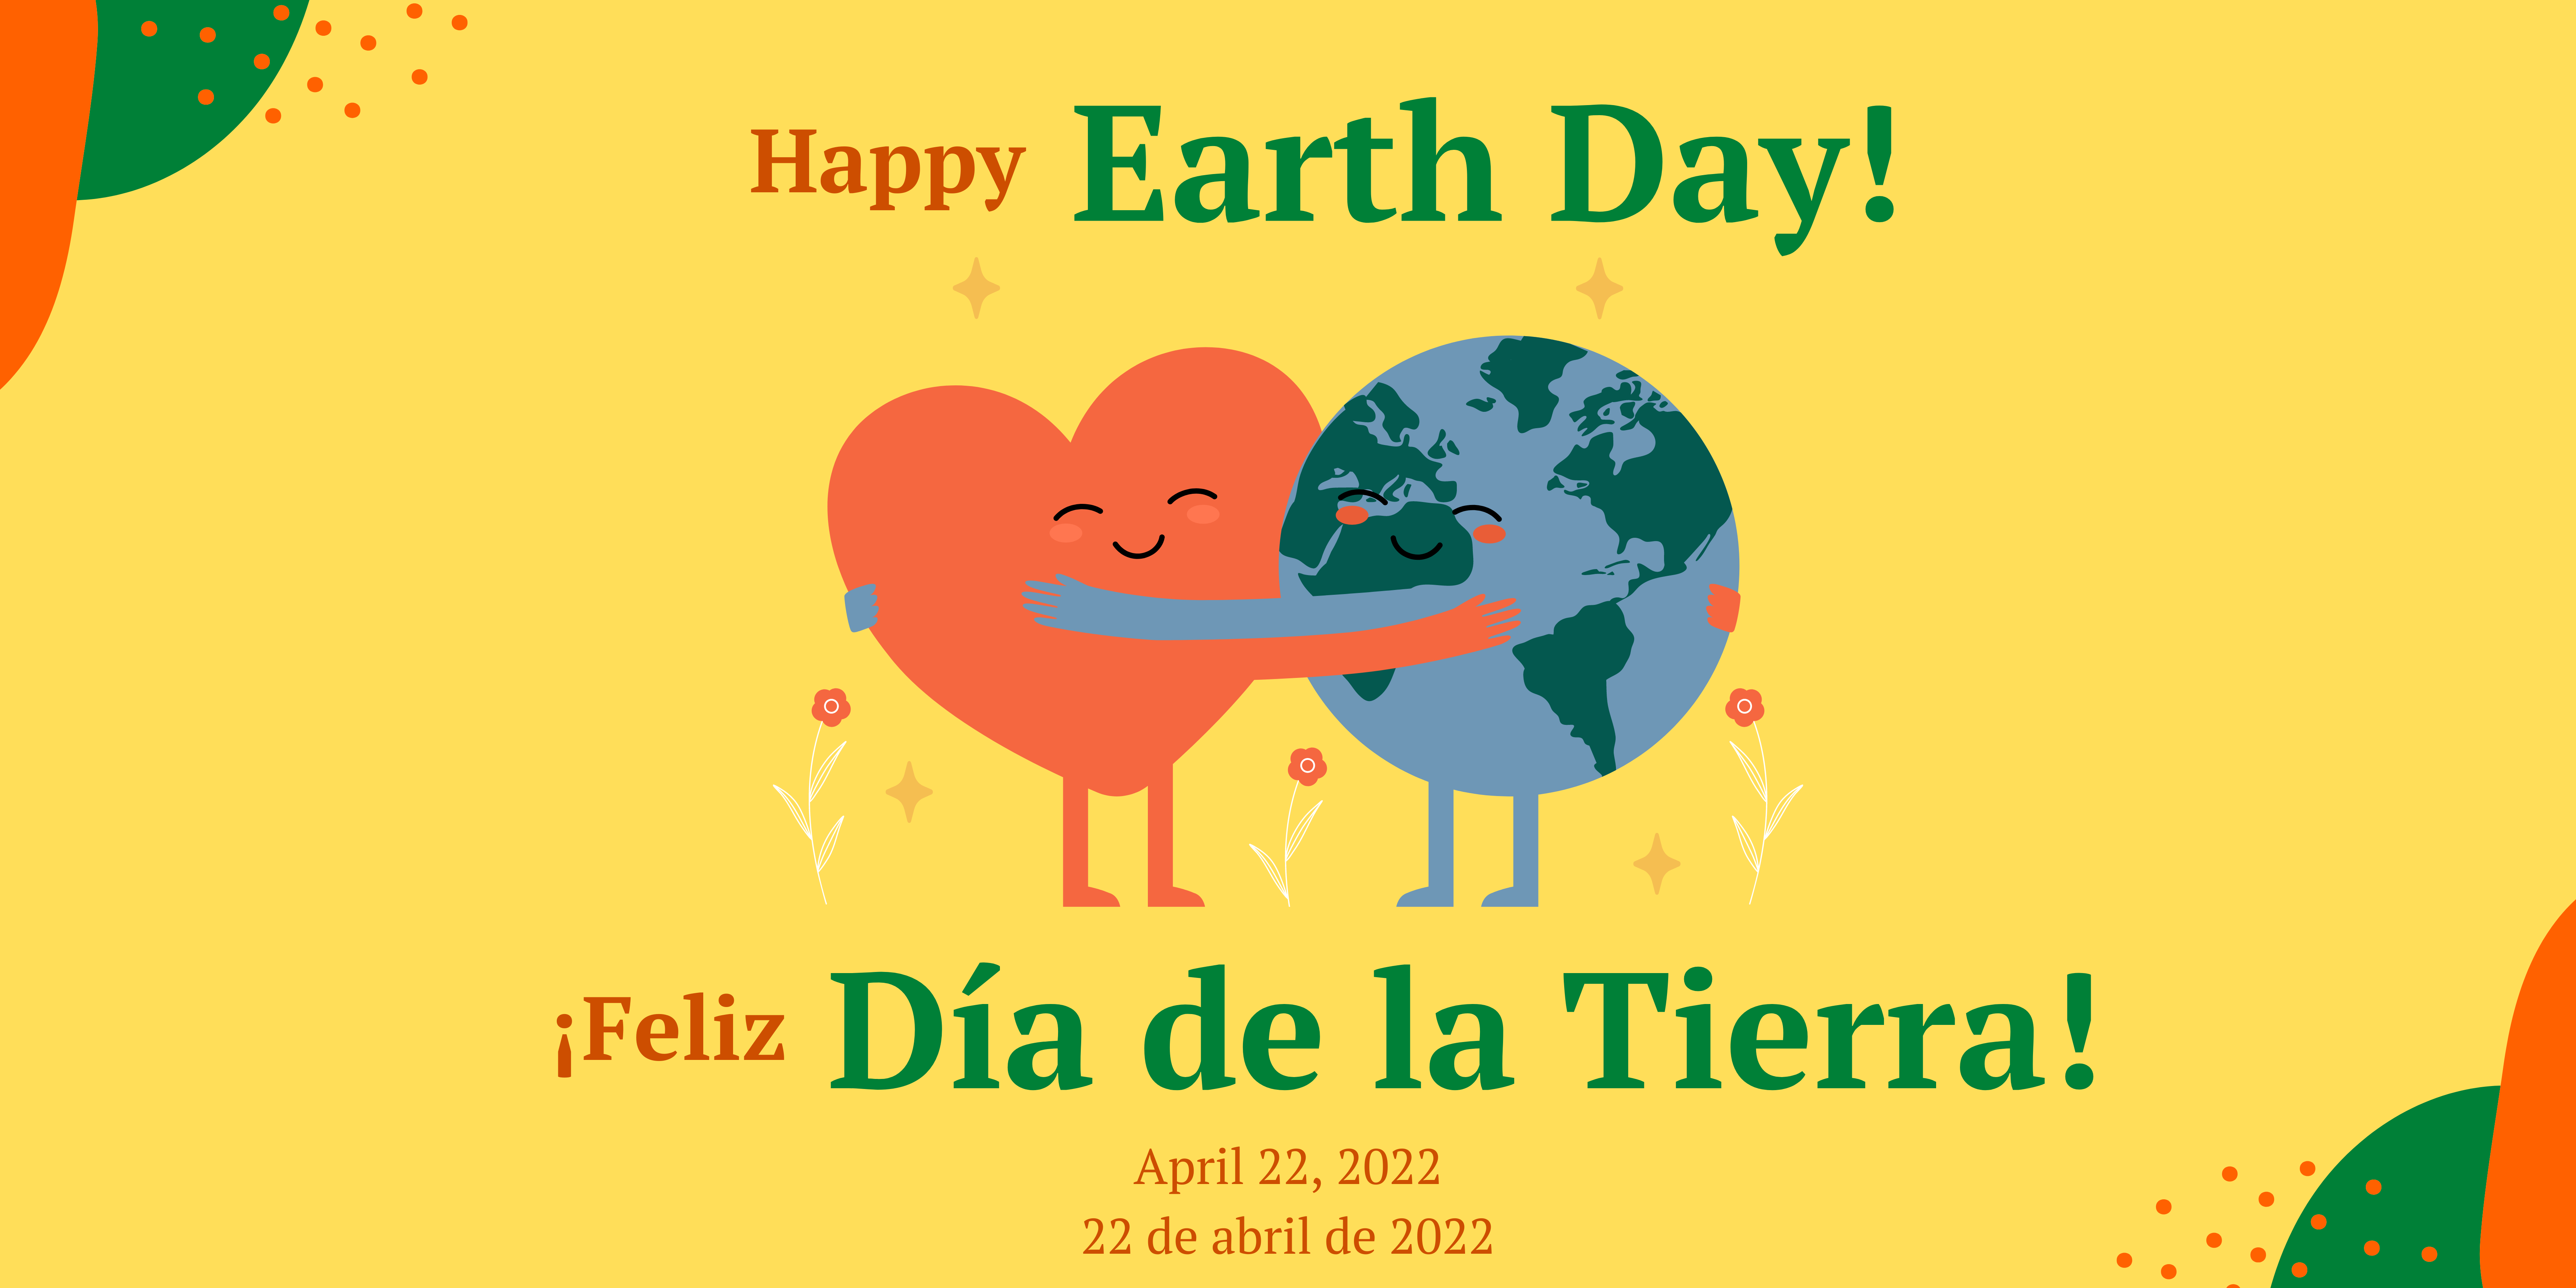 Image of a red heart smiling and hugging a smiling earth on yellow background with text, "Happy Earth Day! Feliz Día de la Tierra! April 22, 2022. 22 de abril de 2022.